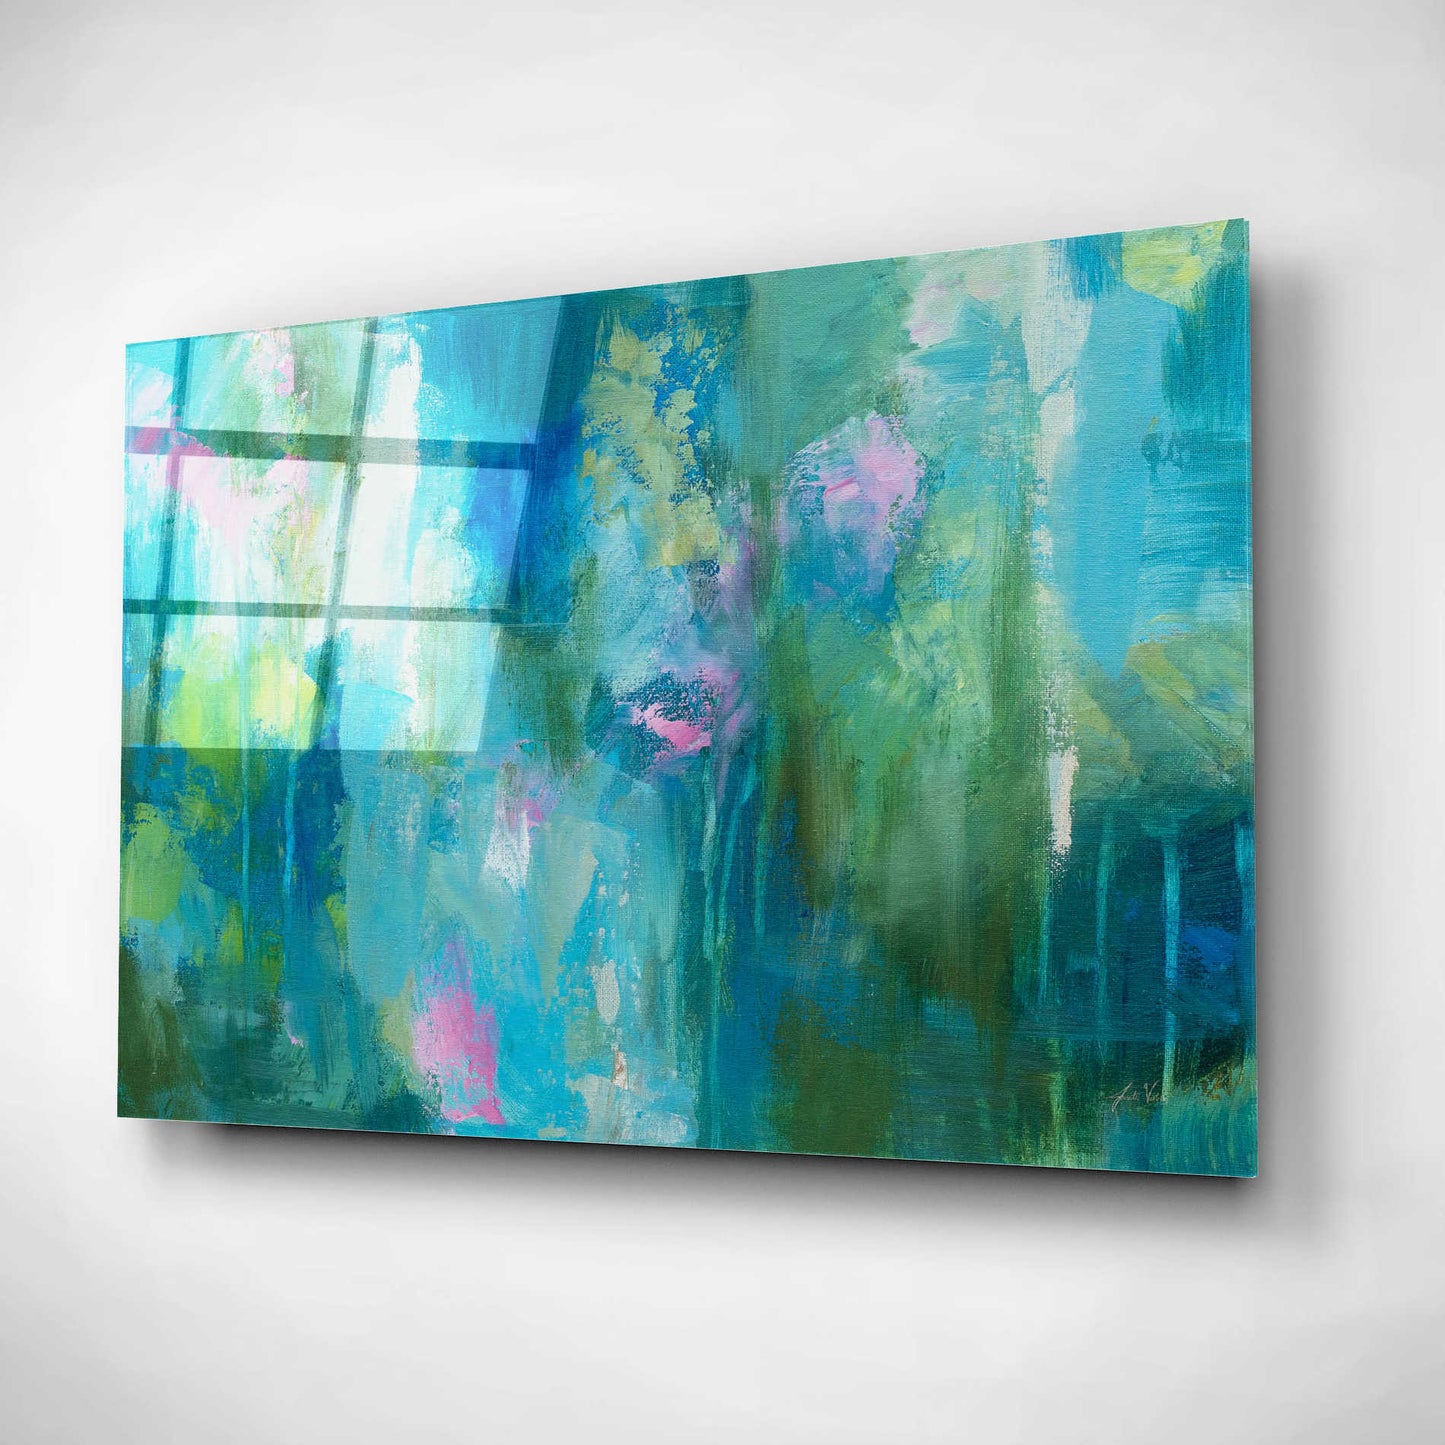 Epic Art 'Playful' by Jeanette Vertentes, Acrylic Glass Wall Art,16x12